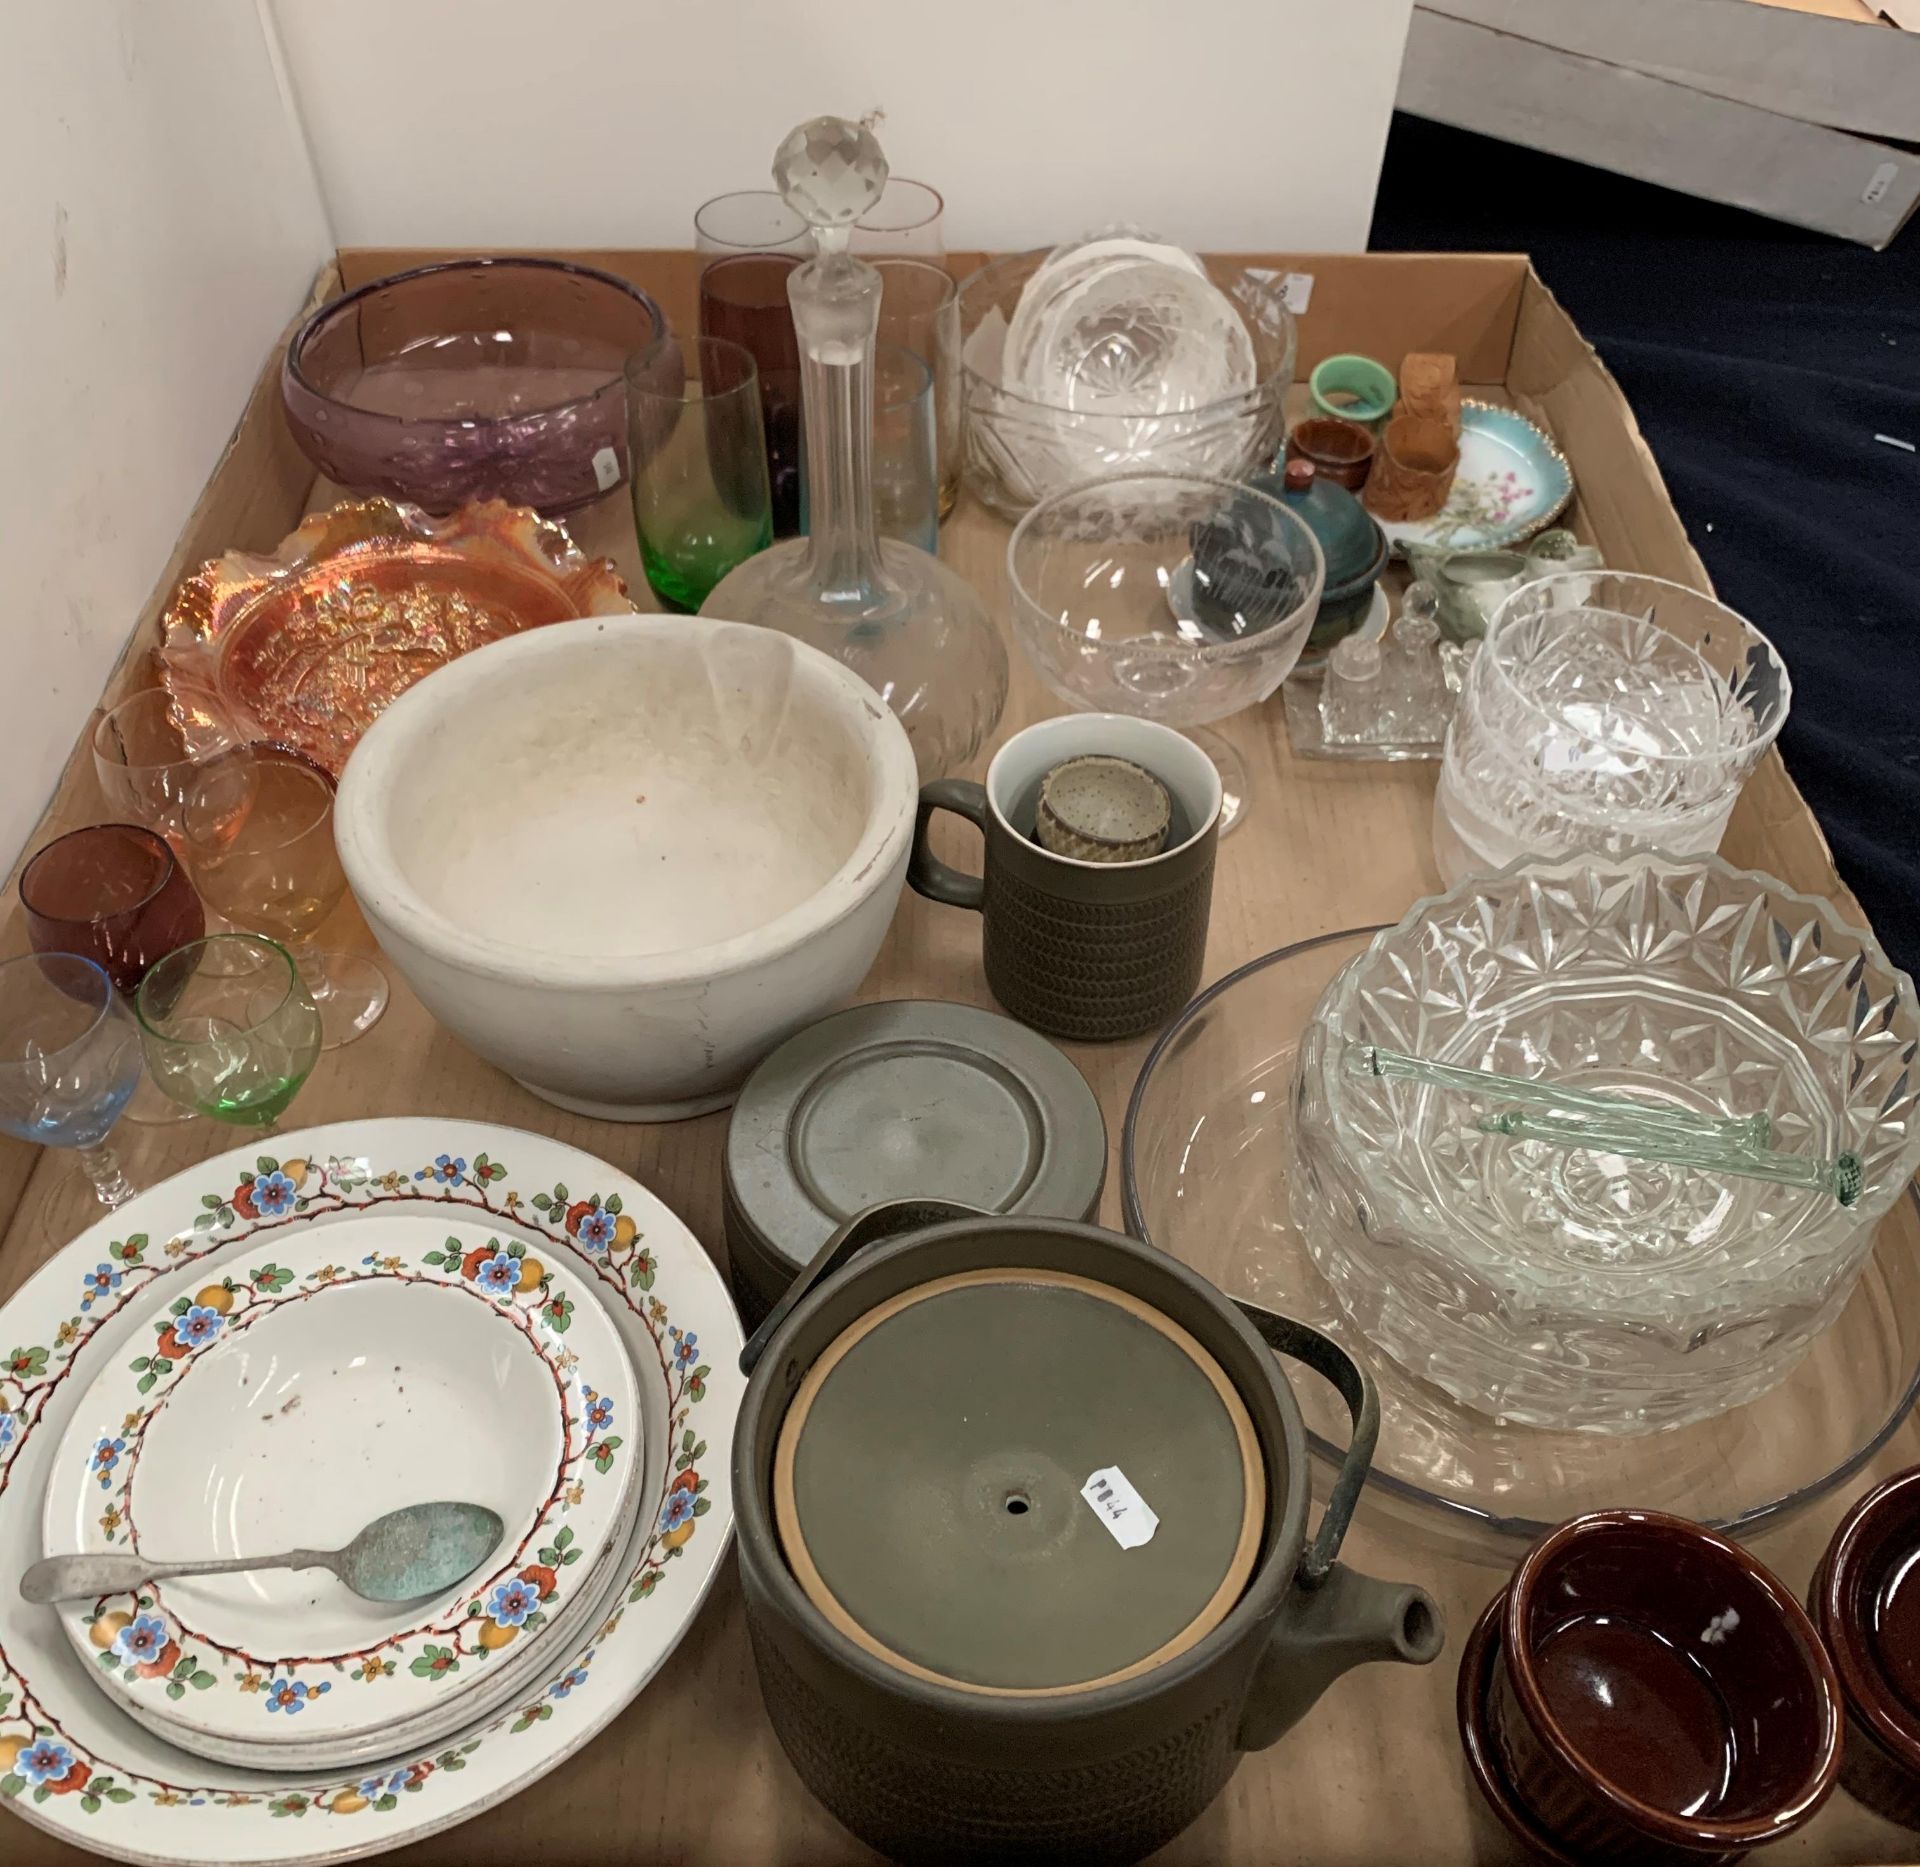 Contents to tray - glassware, decanters, mortar, teapot,